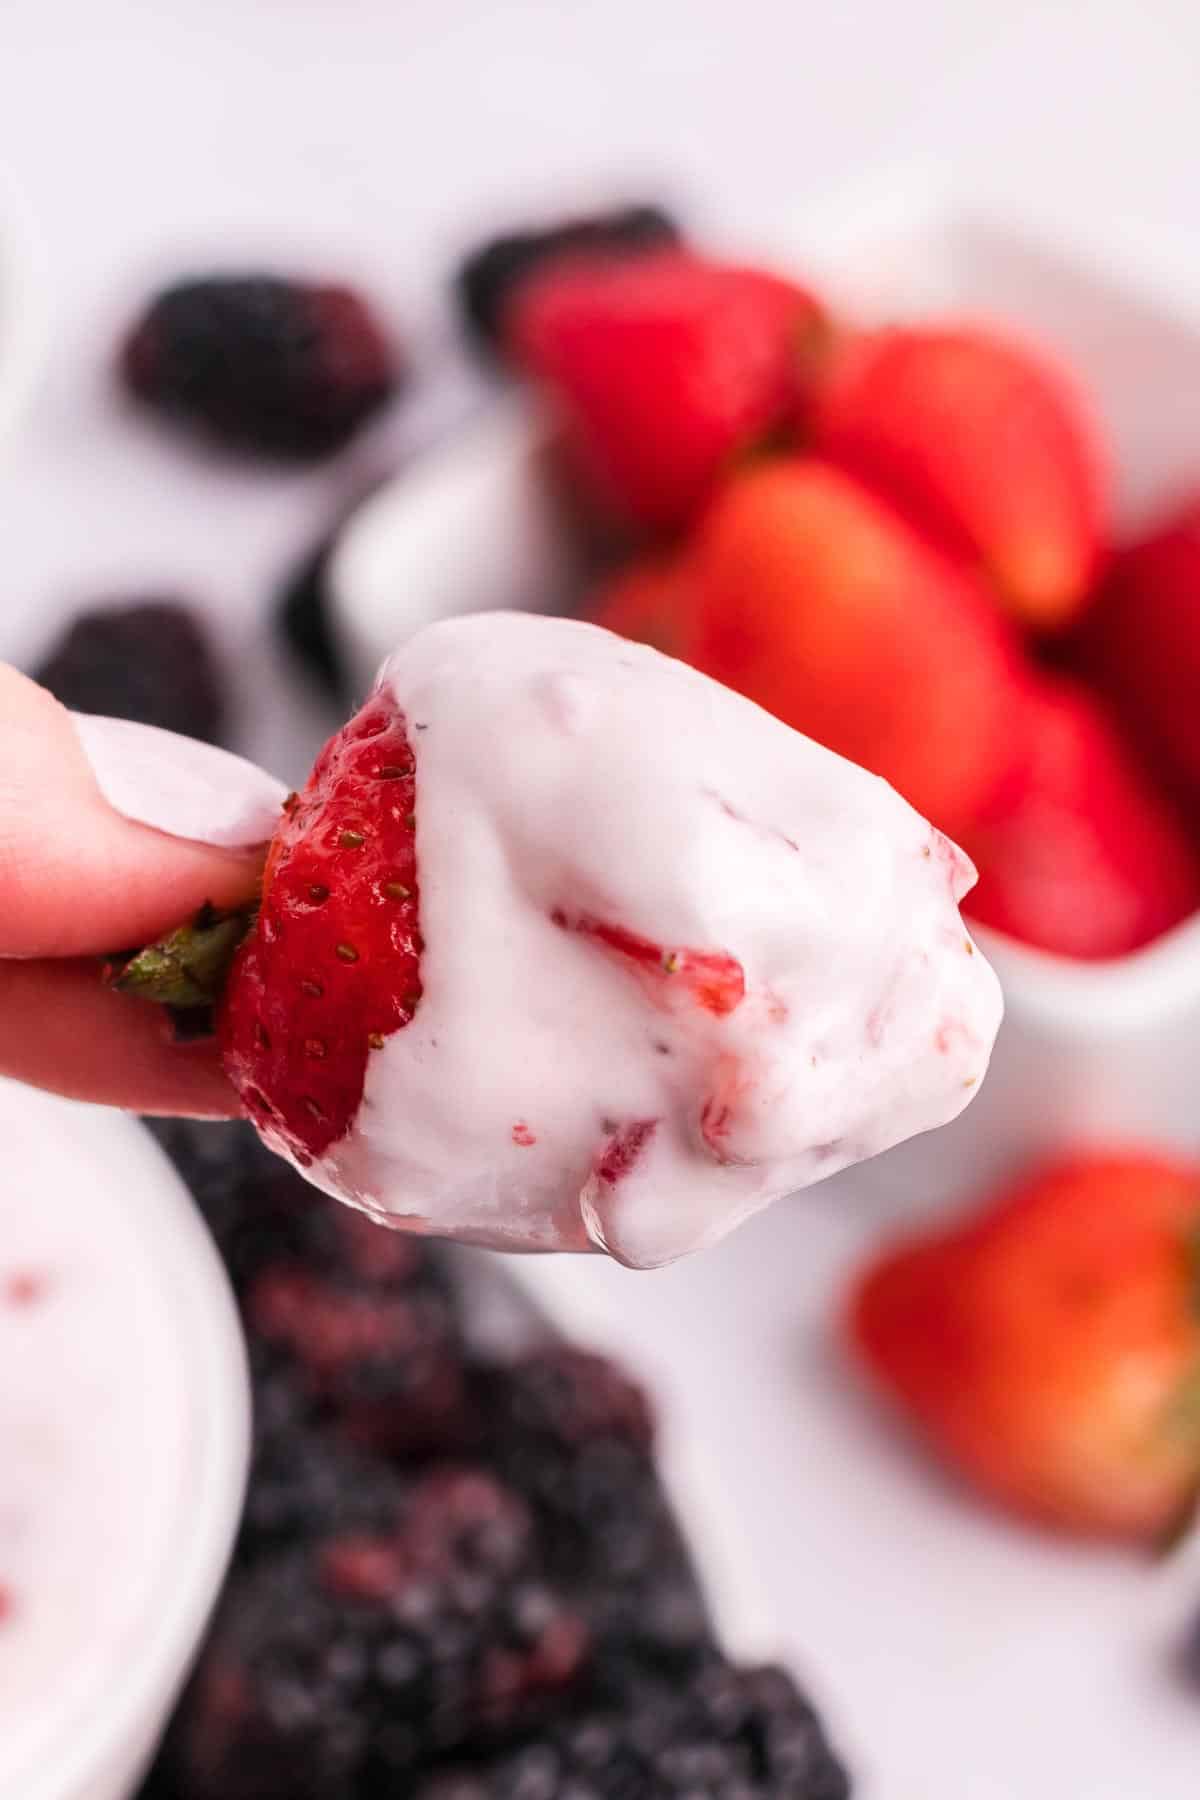 A hand holding a strawberry dipped in cream cheese fruit dip.